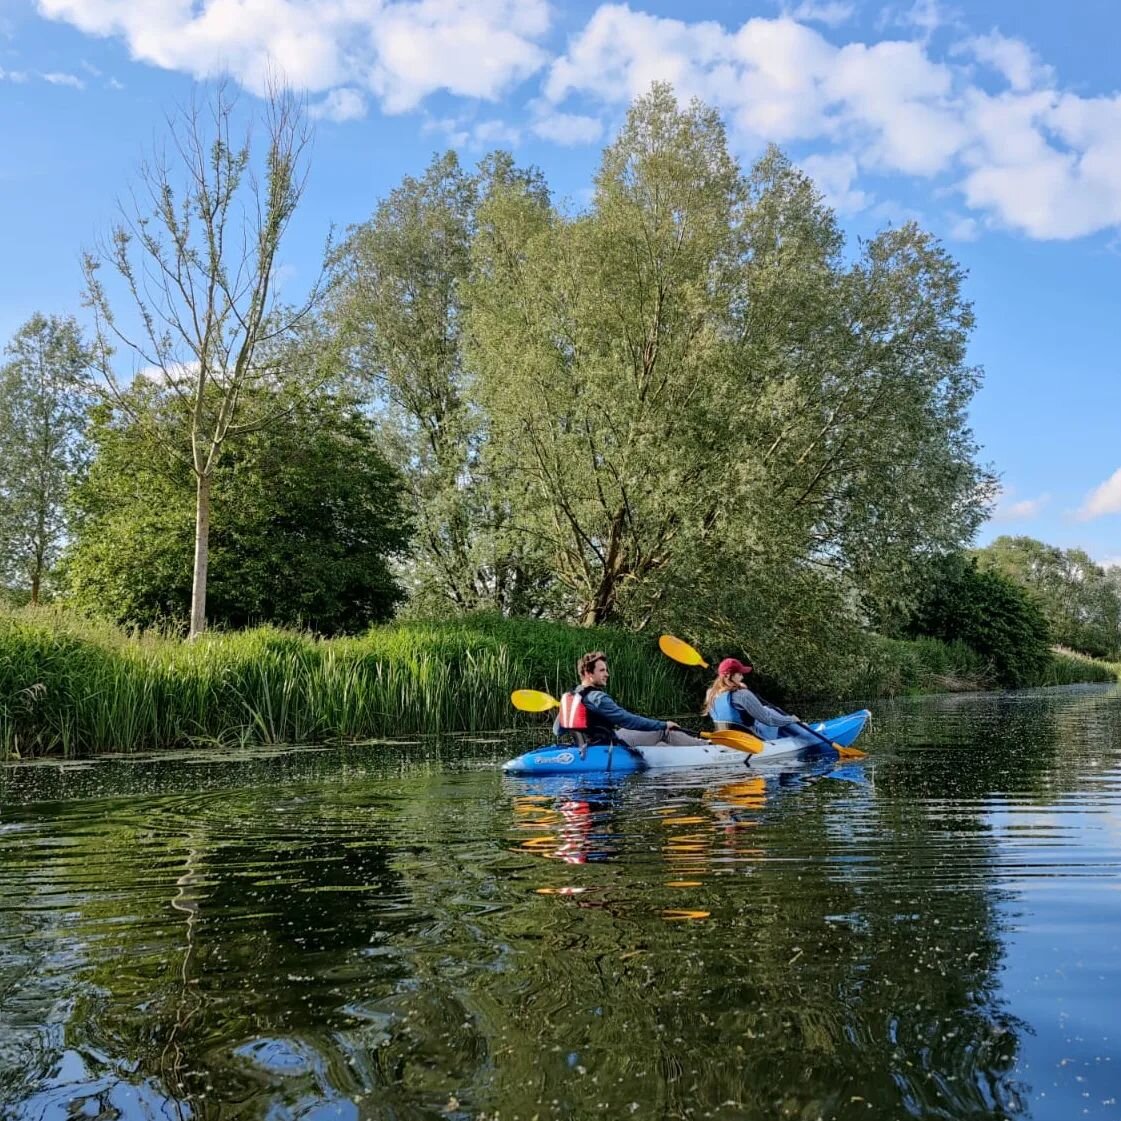 Bank holiday weekend ✔️
Beautiful weather ✔️
Wonderful setting ✔️

What more could you ask for?

We're open everyday this Jubilee bank holiday weekend 🇬🇧

#jubilee
#bankholiday 
#kayaking 
#sudburysuffolk 
#Essex 
#suffolk 
#eastanglia